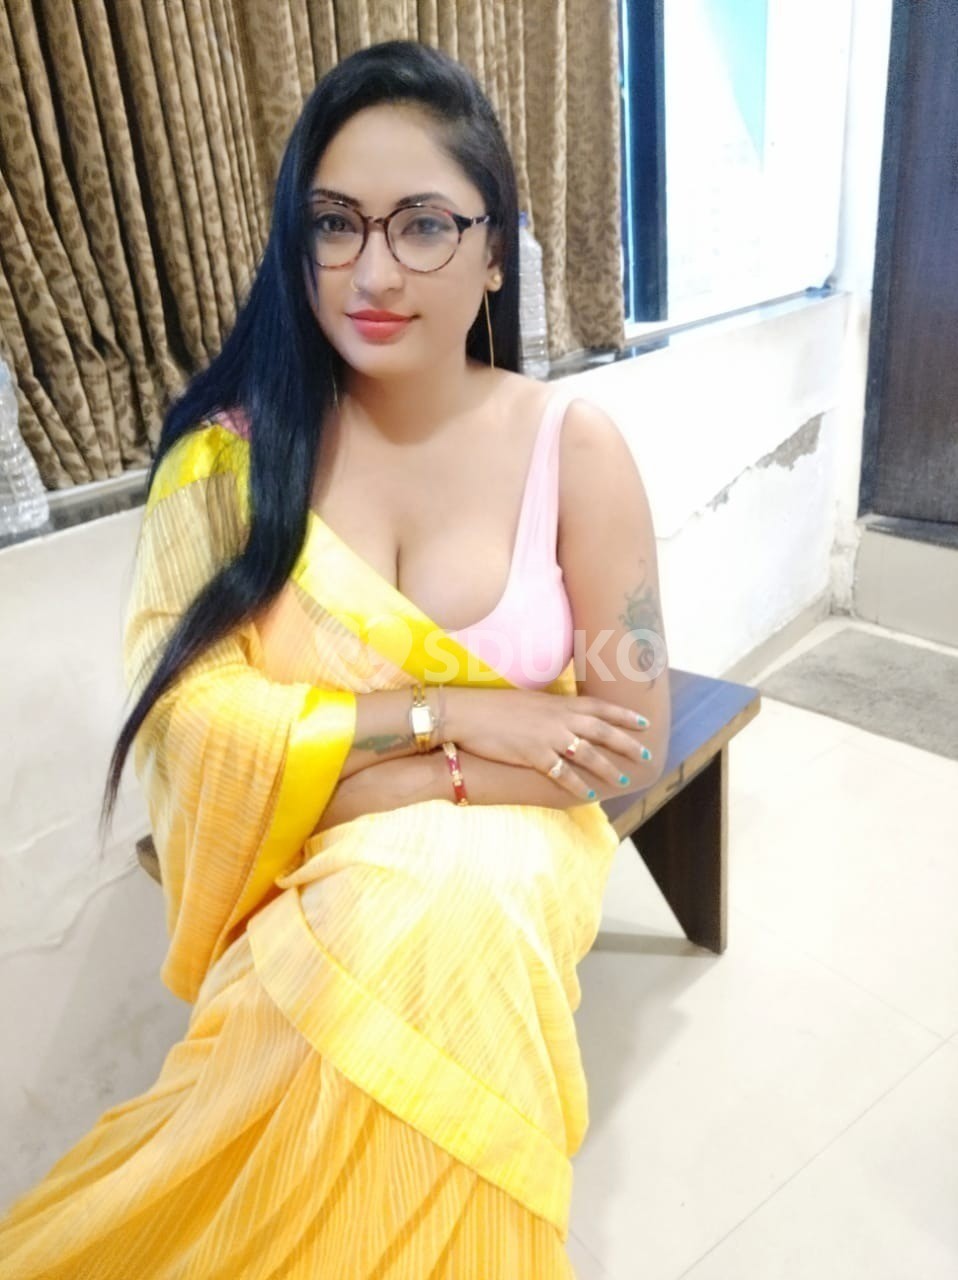 PAYAL Pandey LOW PRICE🔸✅ SERVICE AVAILABLE 100% SAFE AND SECURE UNLIMITED ENJOY HOT COLLEGE GIRL HOUSEWIFE AUNTIE